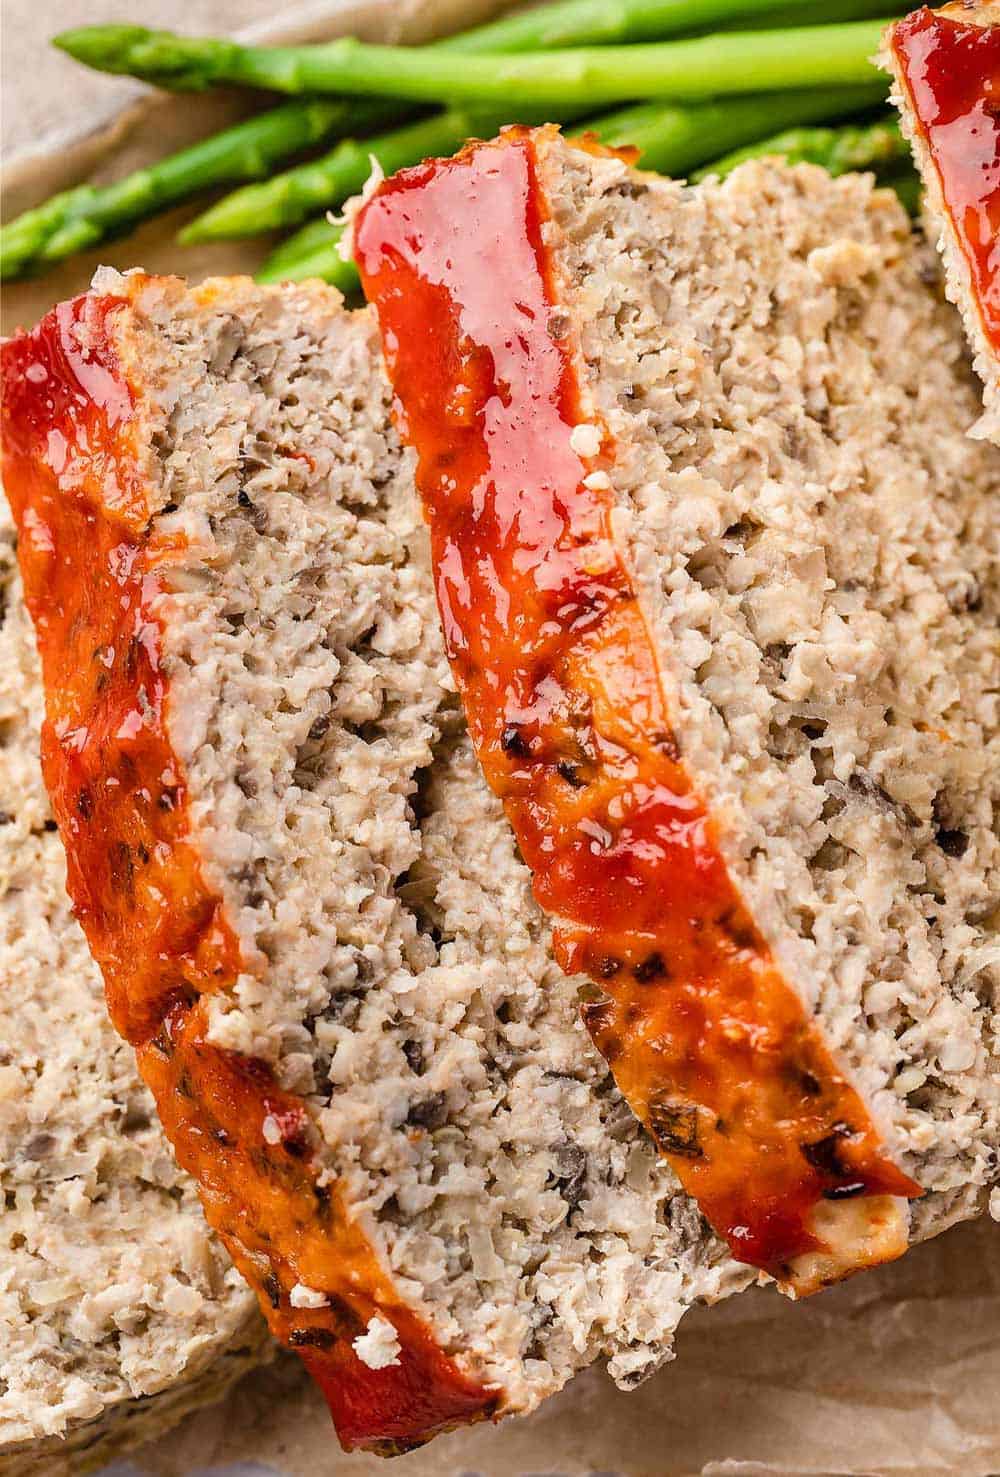 Close-up view of slices of Turkey Quinoa Meatloaf, showcasing its hearty texture and wholesome ingredients.